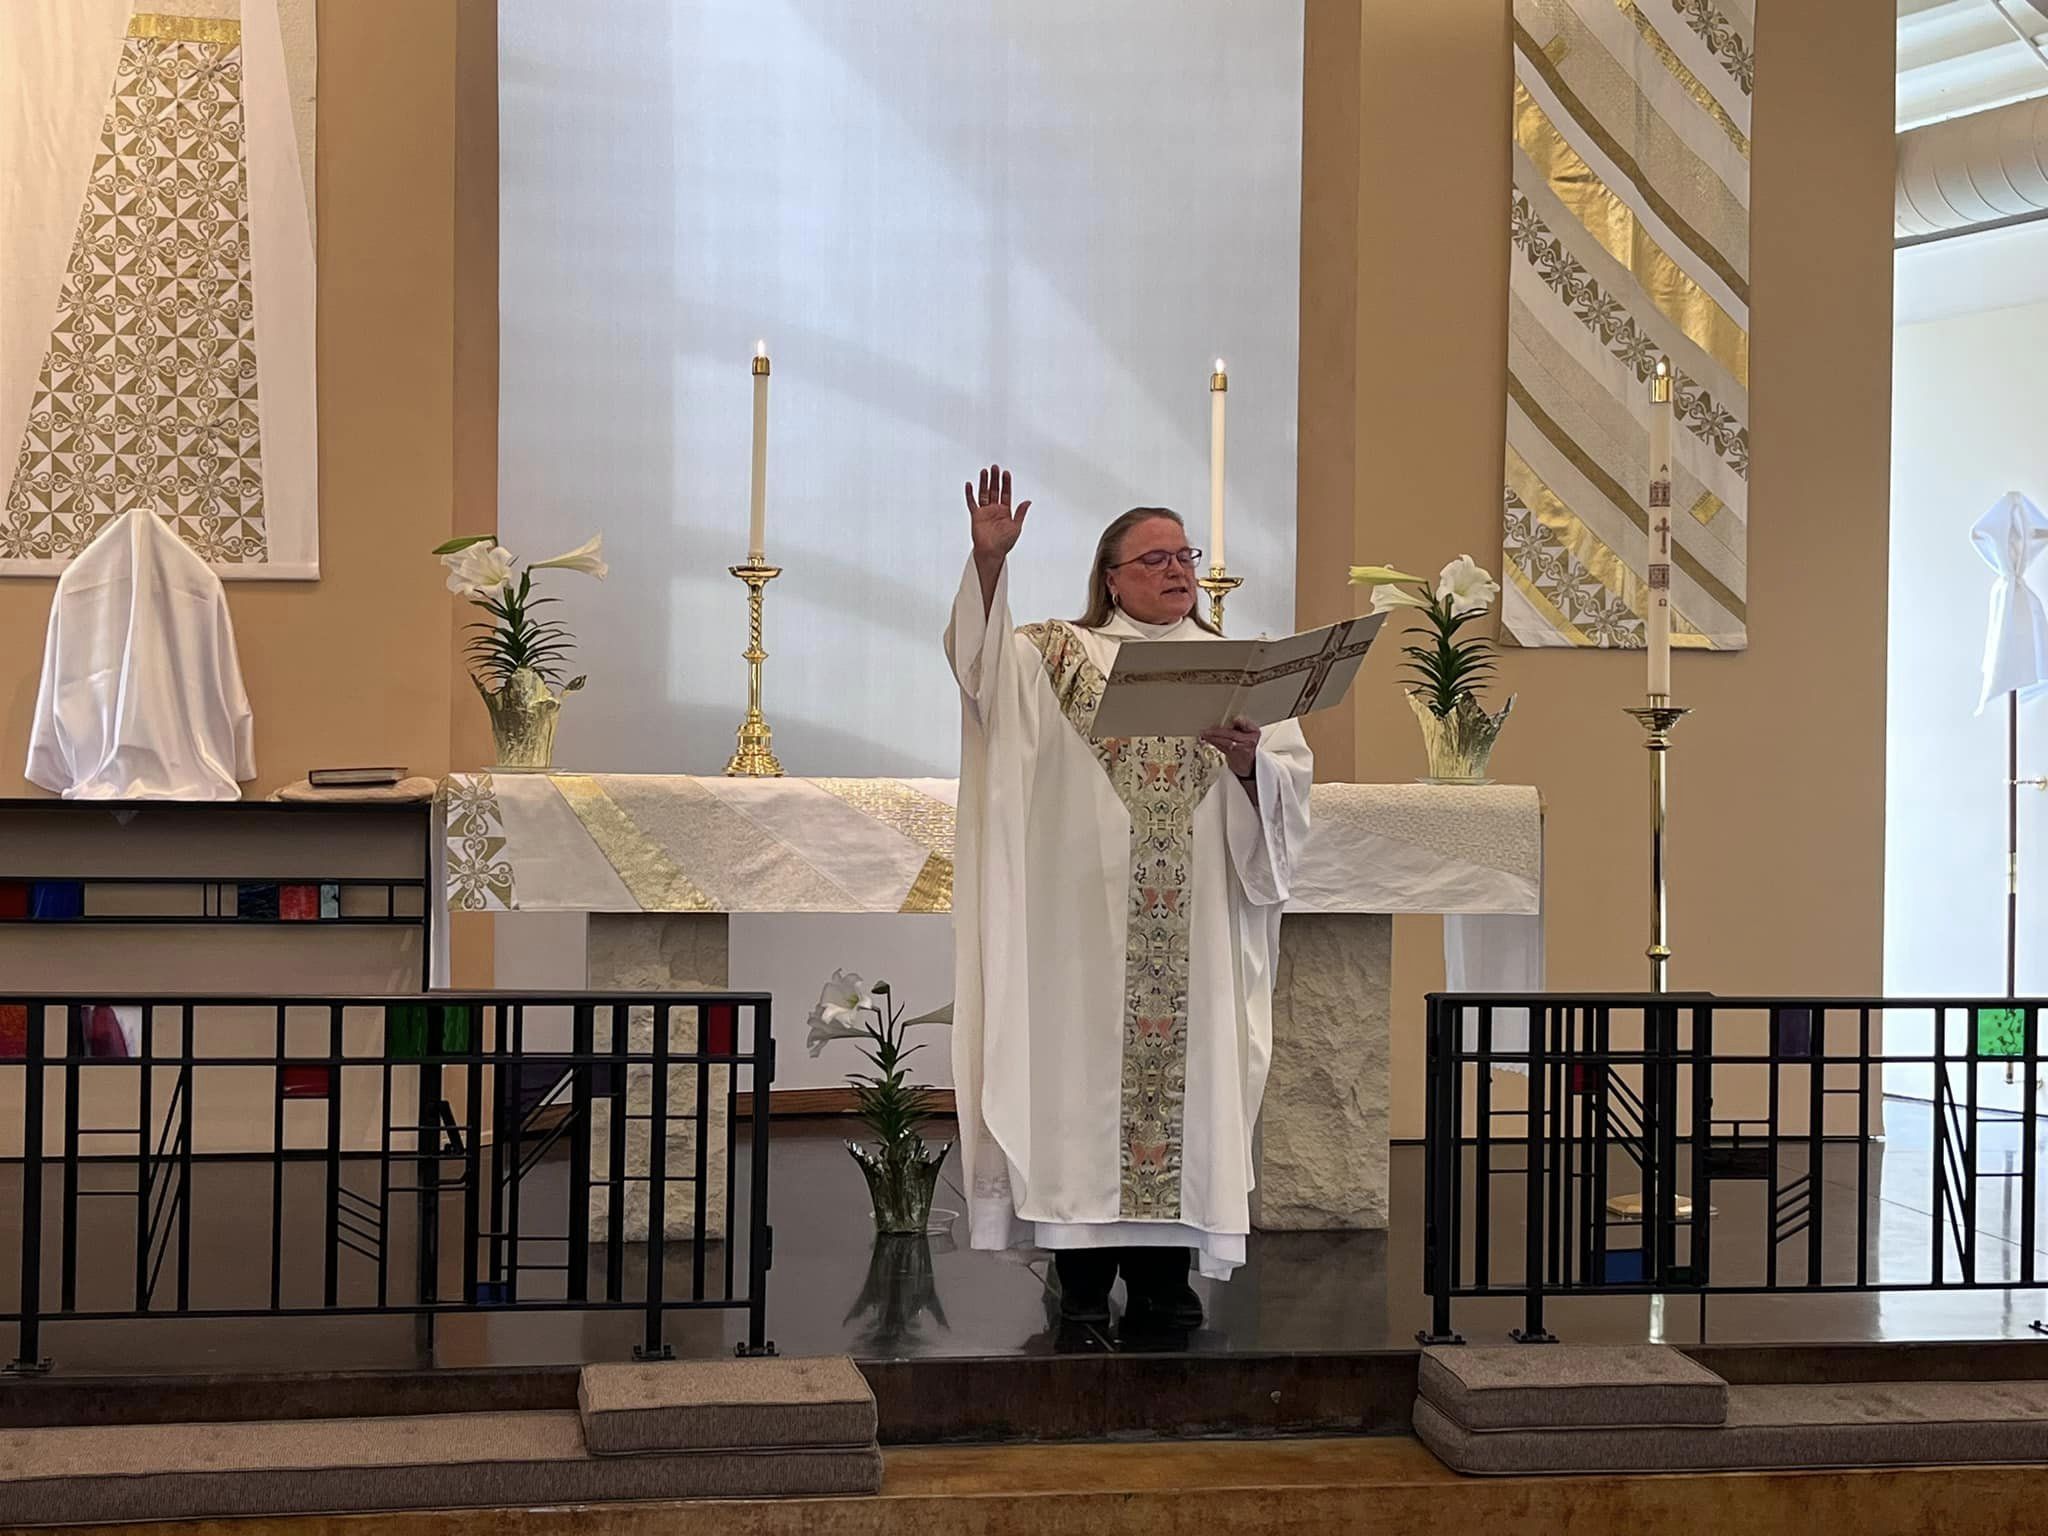 Join the Bishop at Grace Episcopal Church in Liberty for the Feast of the Ascension